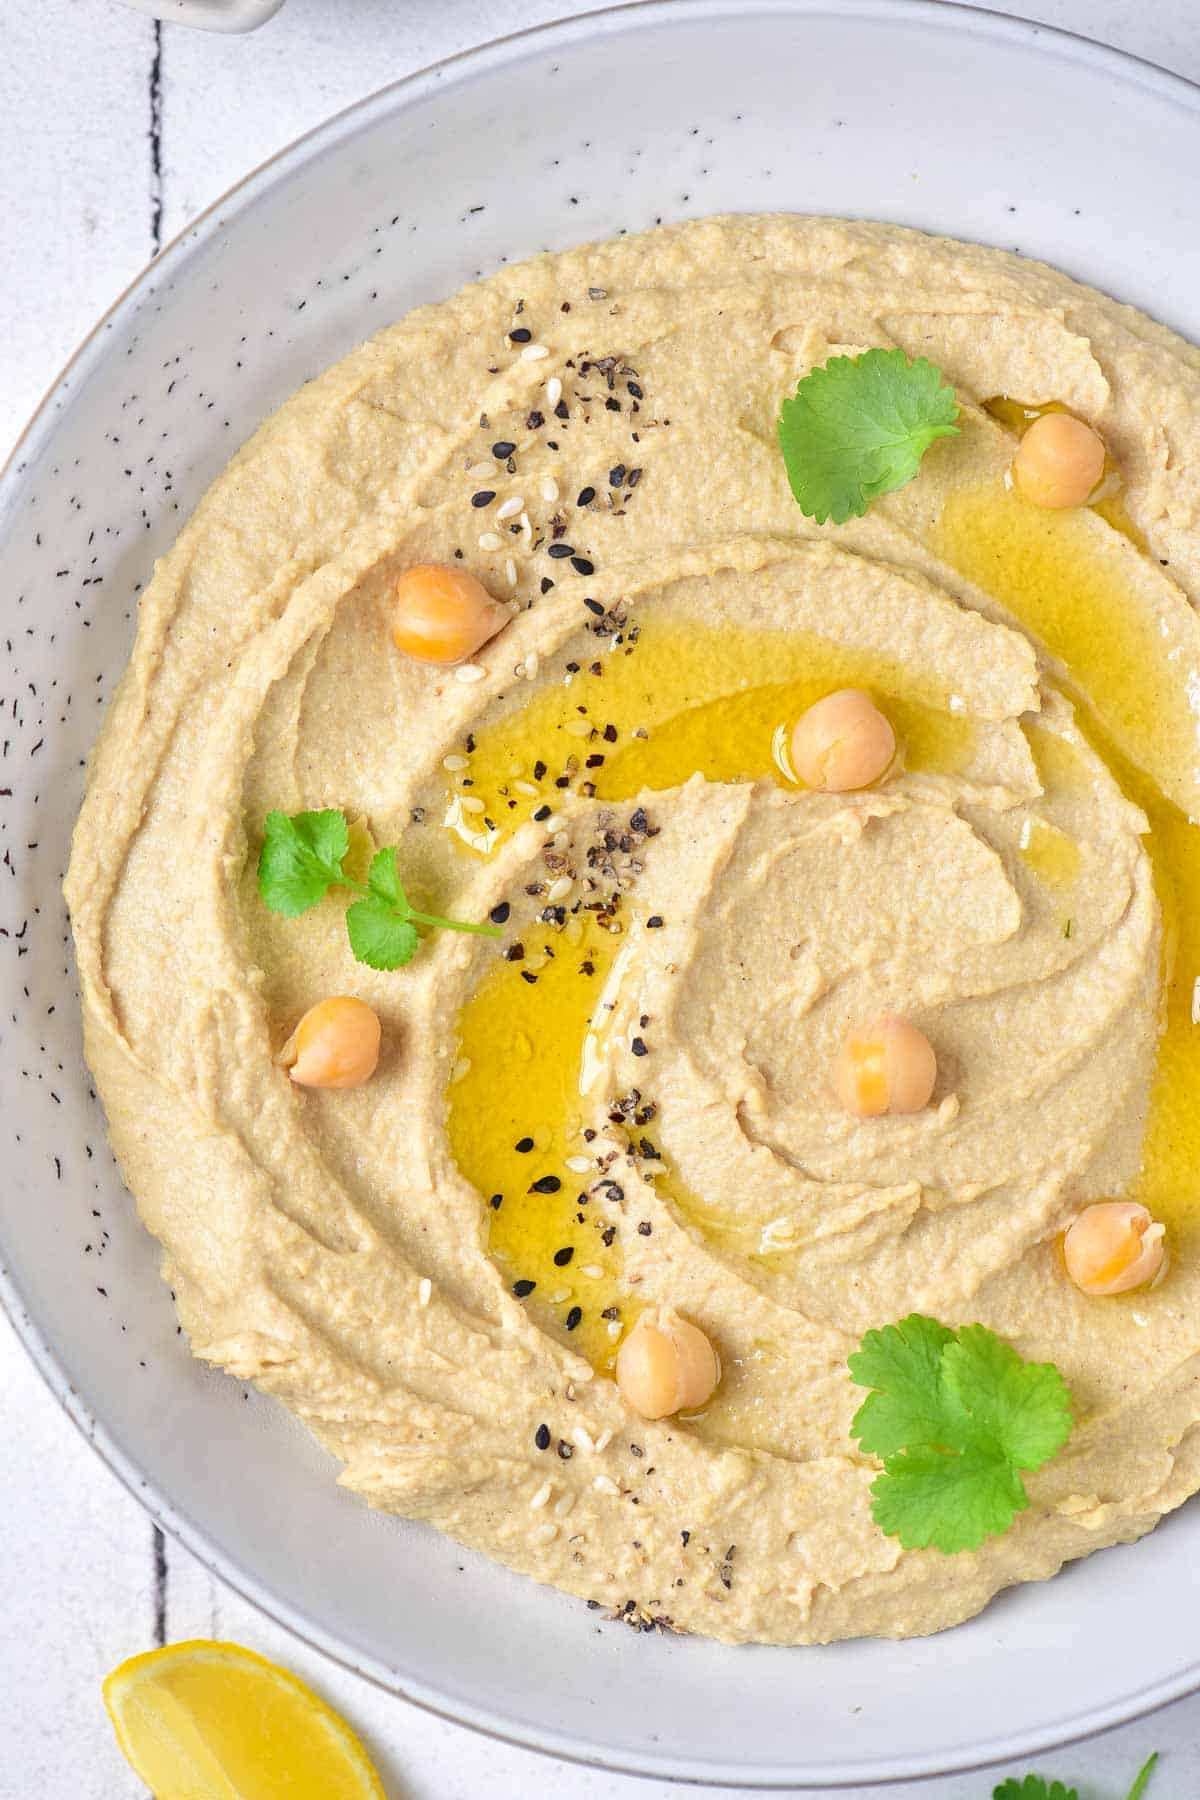 A bowl of hummus topped with olive oil and cilantro.